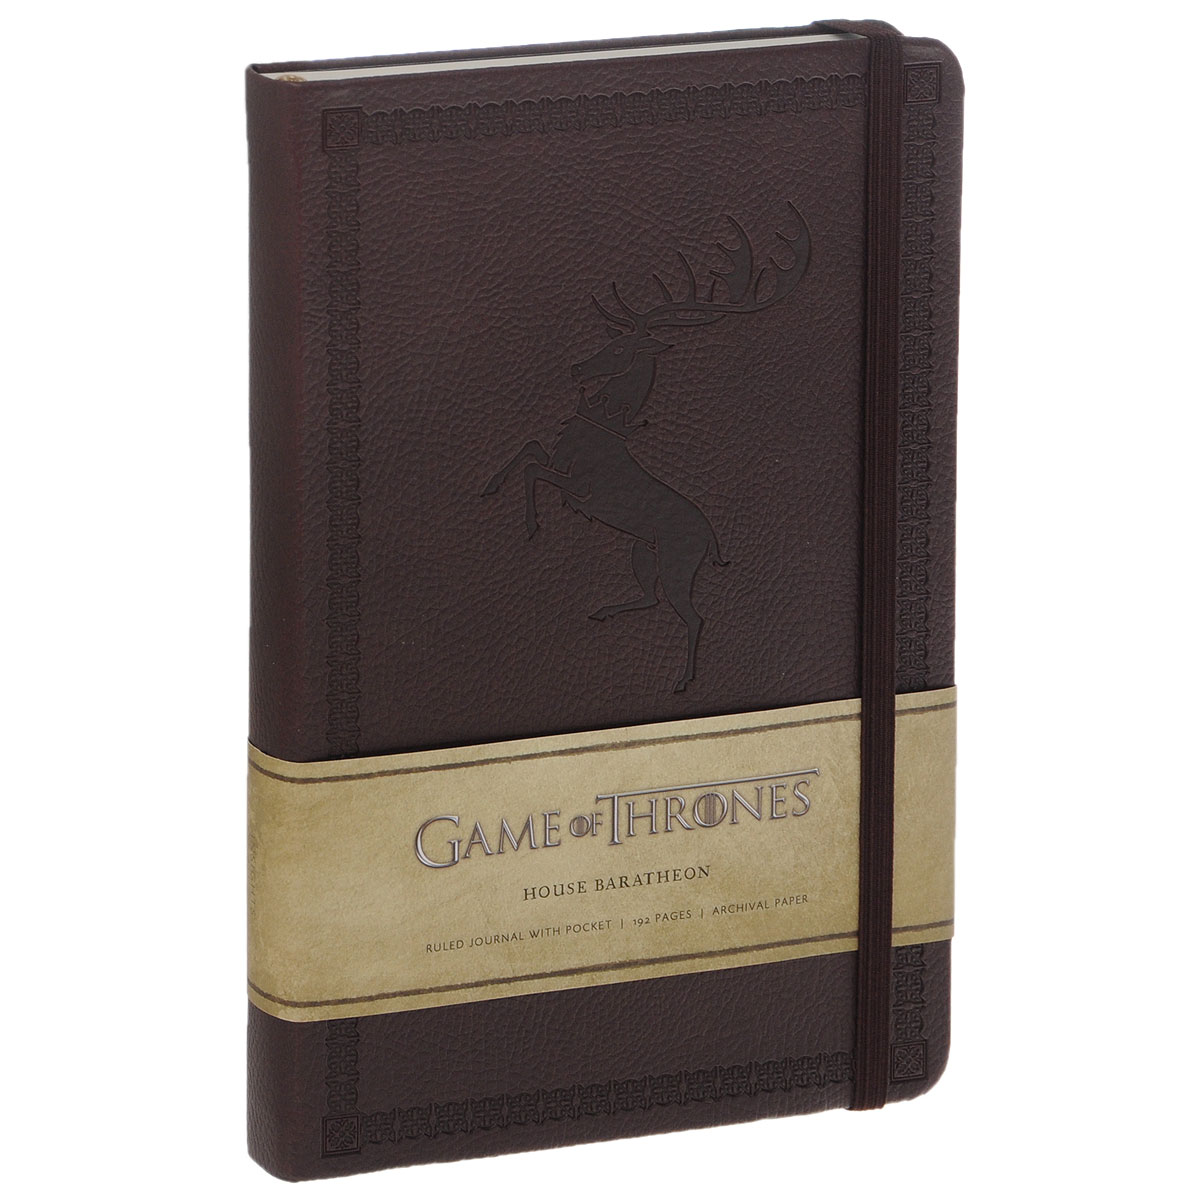 Game of Thrones Ruled Journal: House of Baratheon